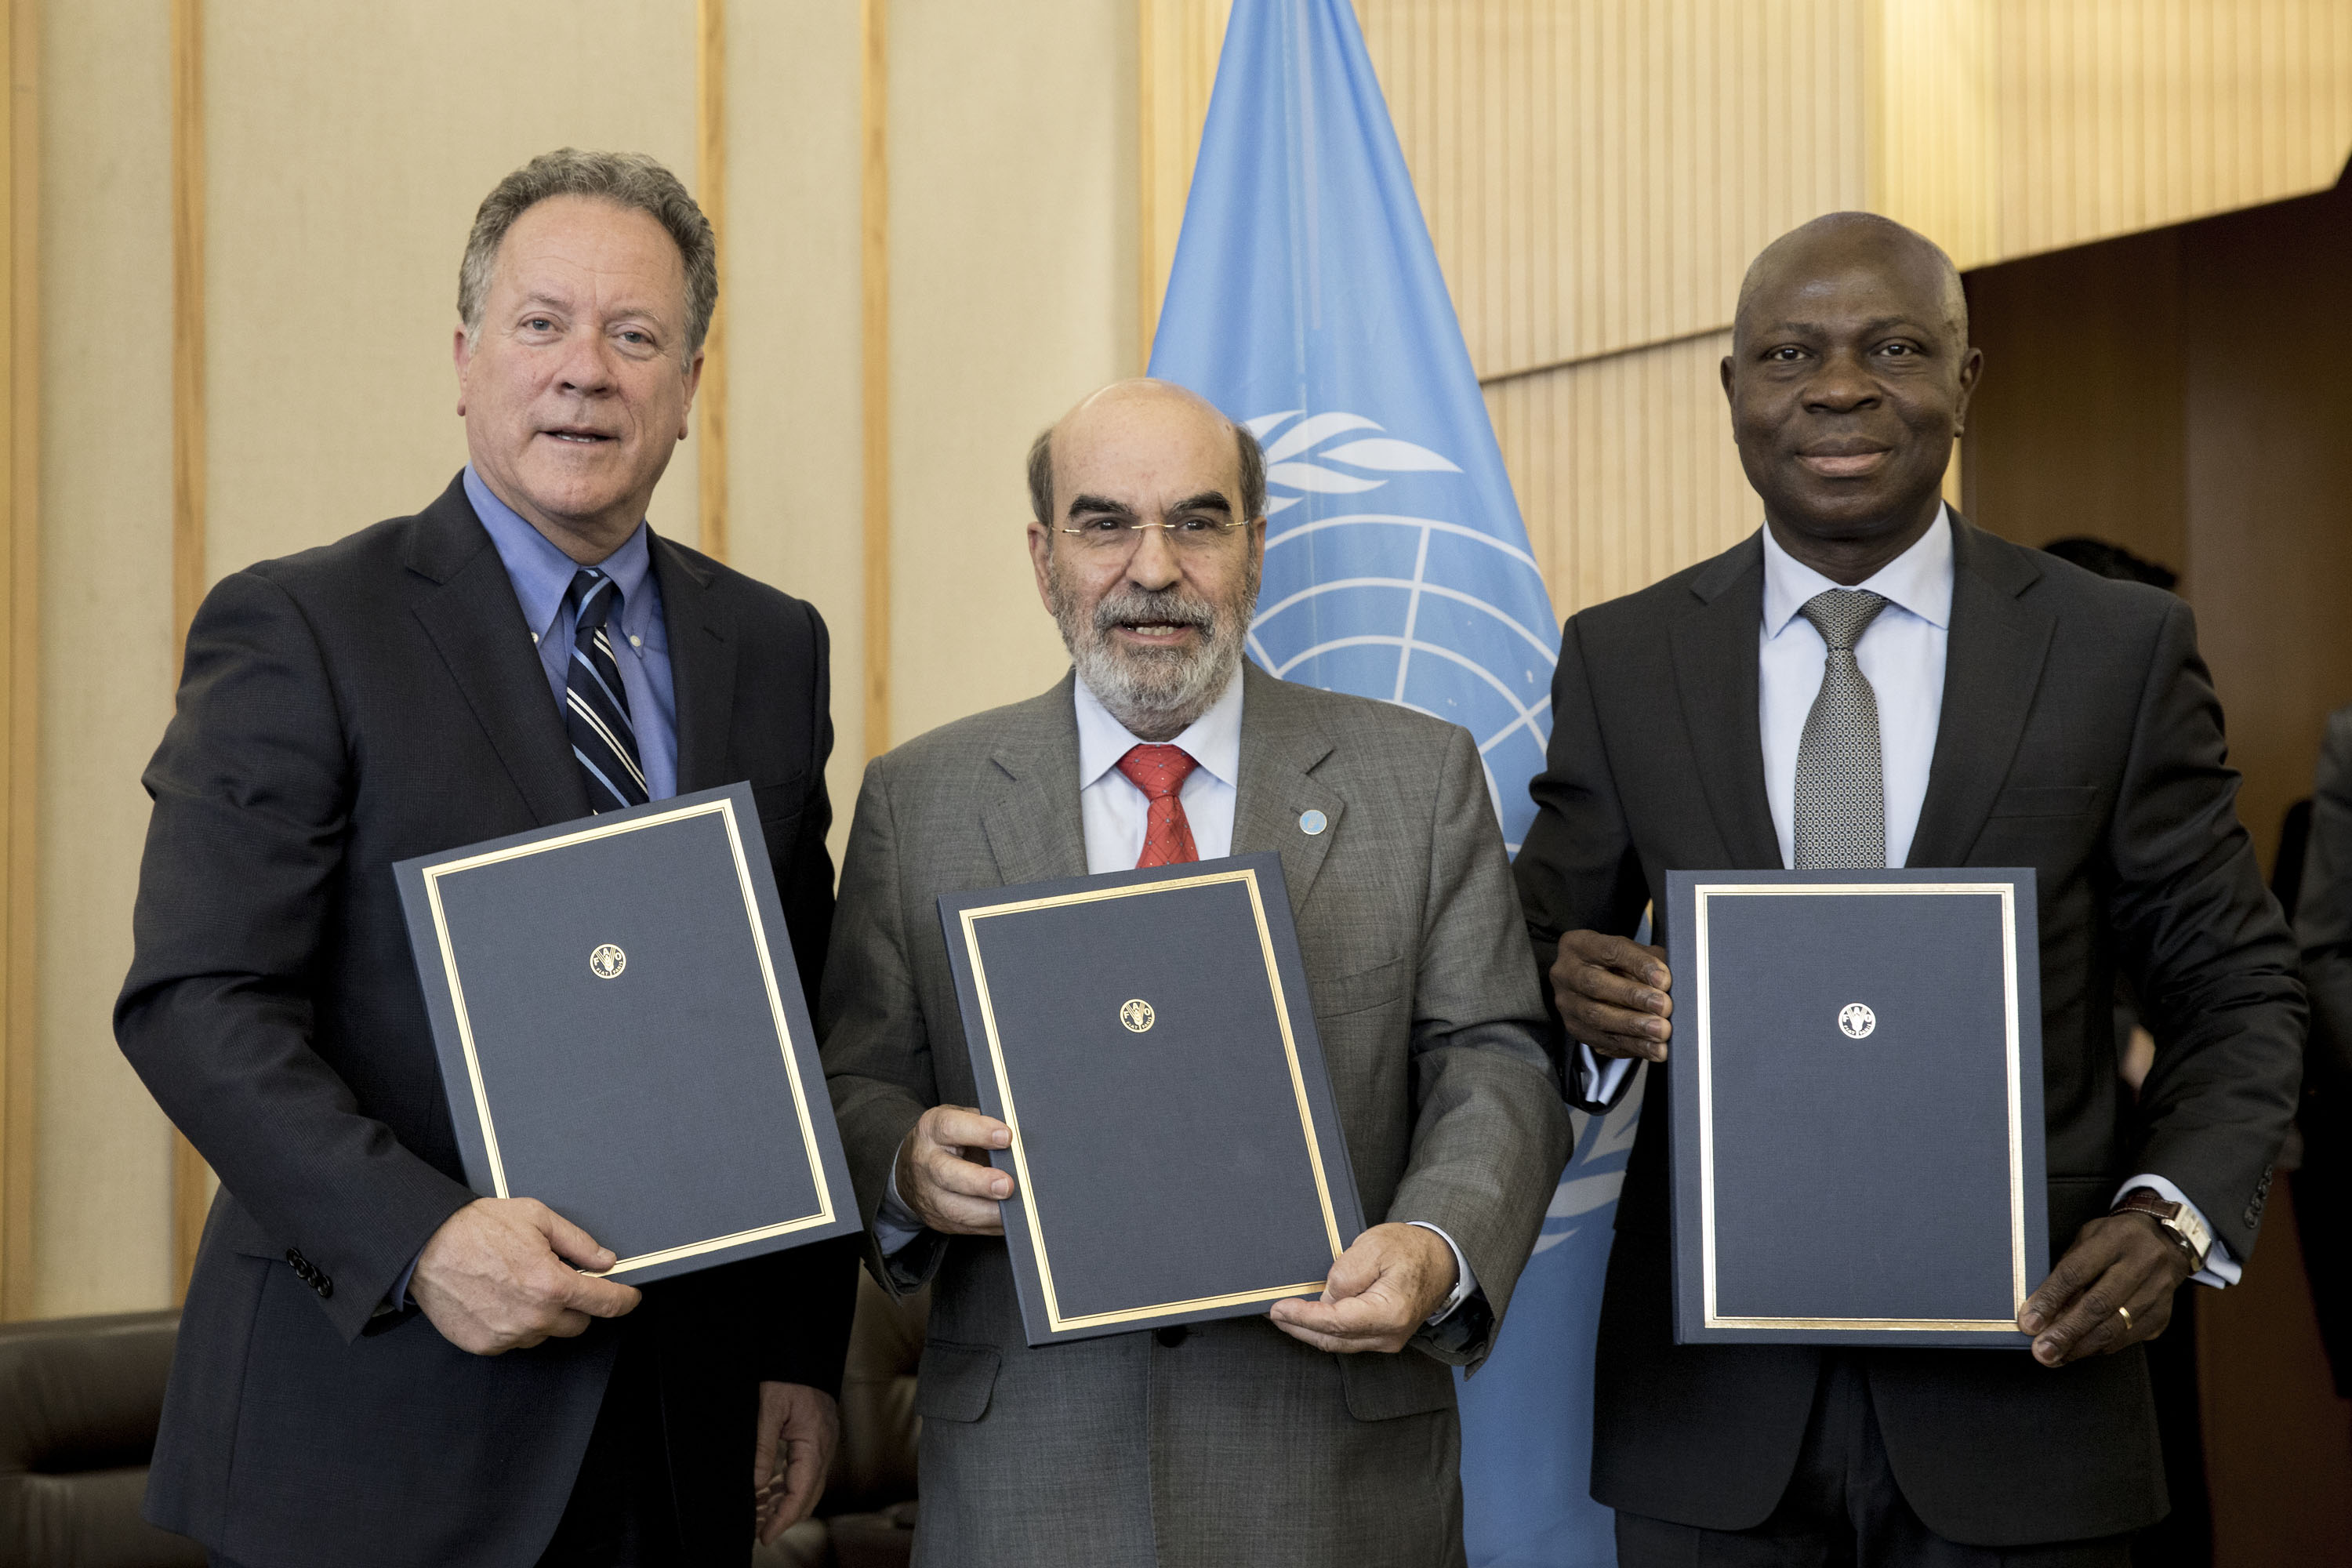 UN Food Agencies commit to deeper collaboration to achieve Zero Hunger